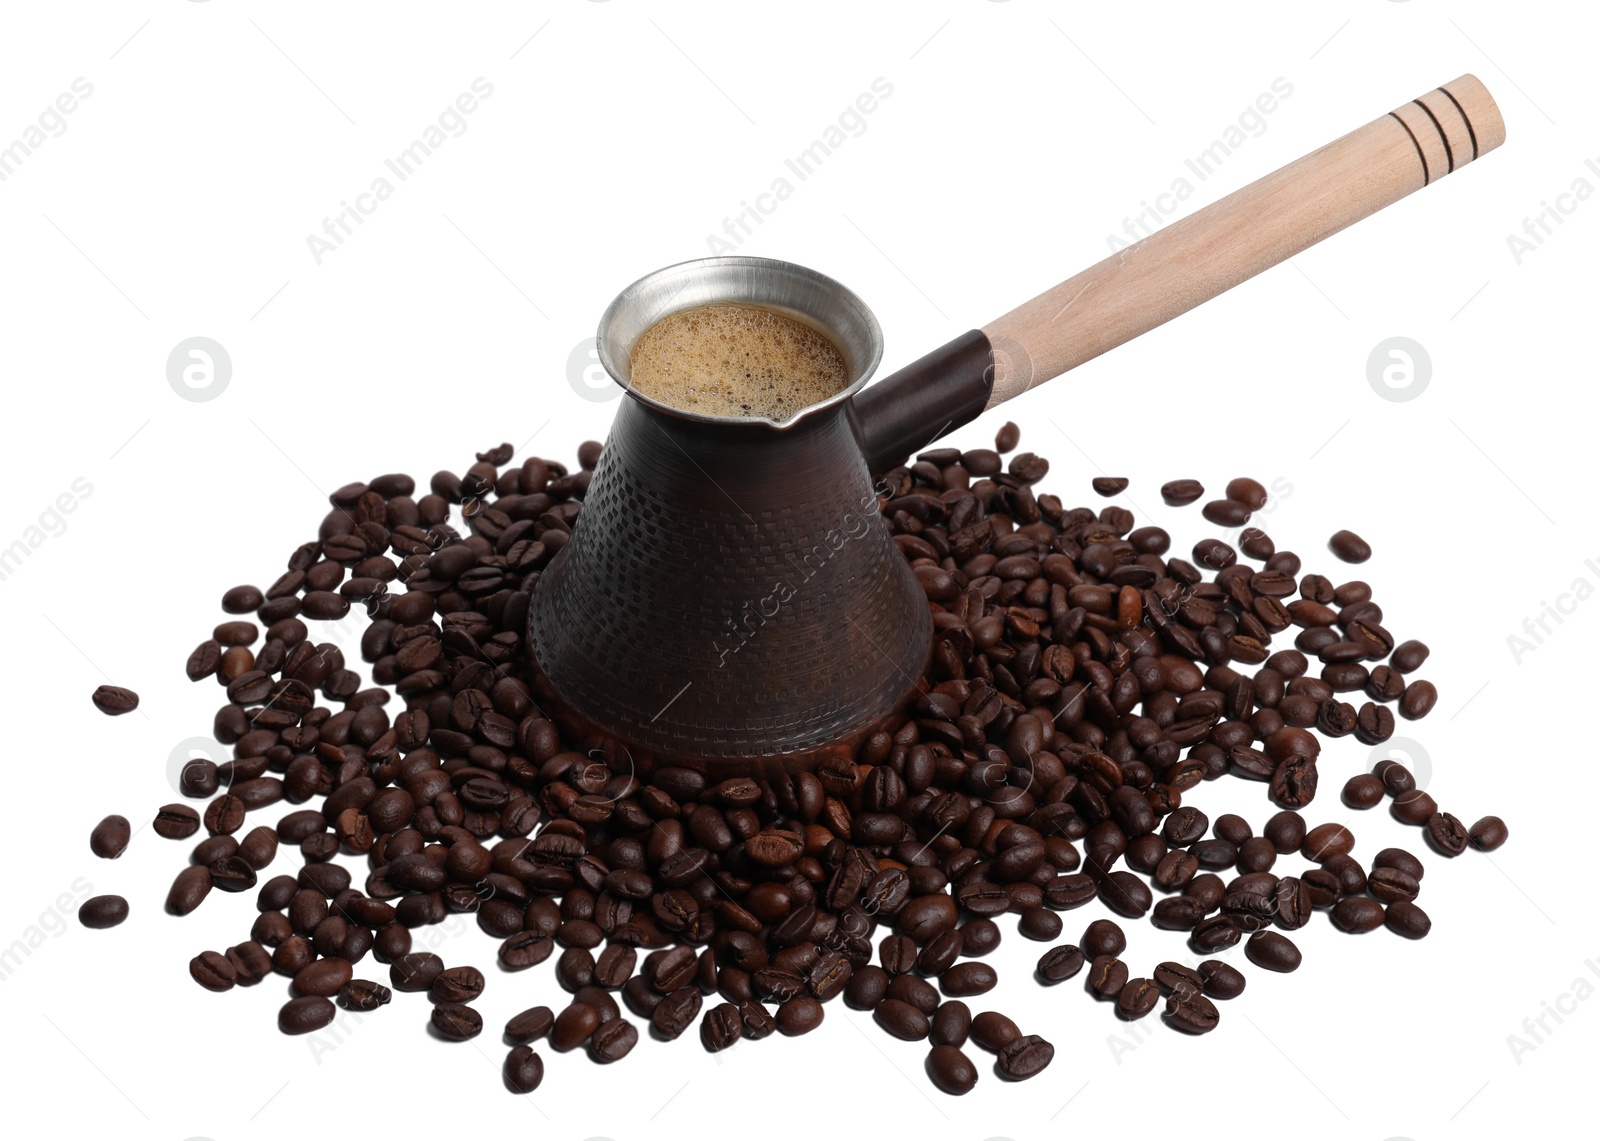 Photo of Metal turkish coffee pot with hot drink and beans on white background